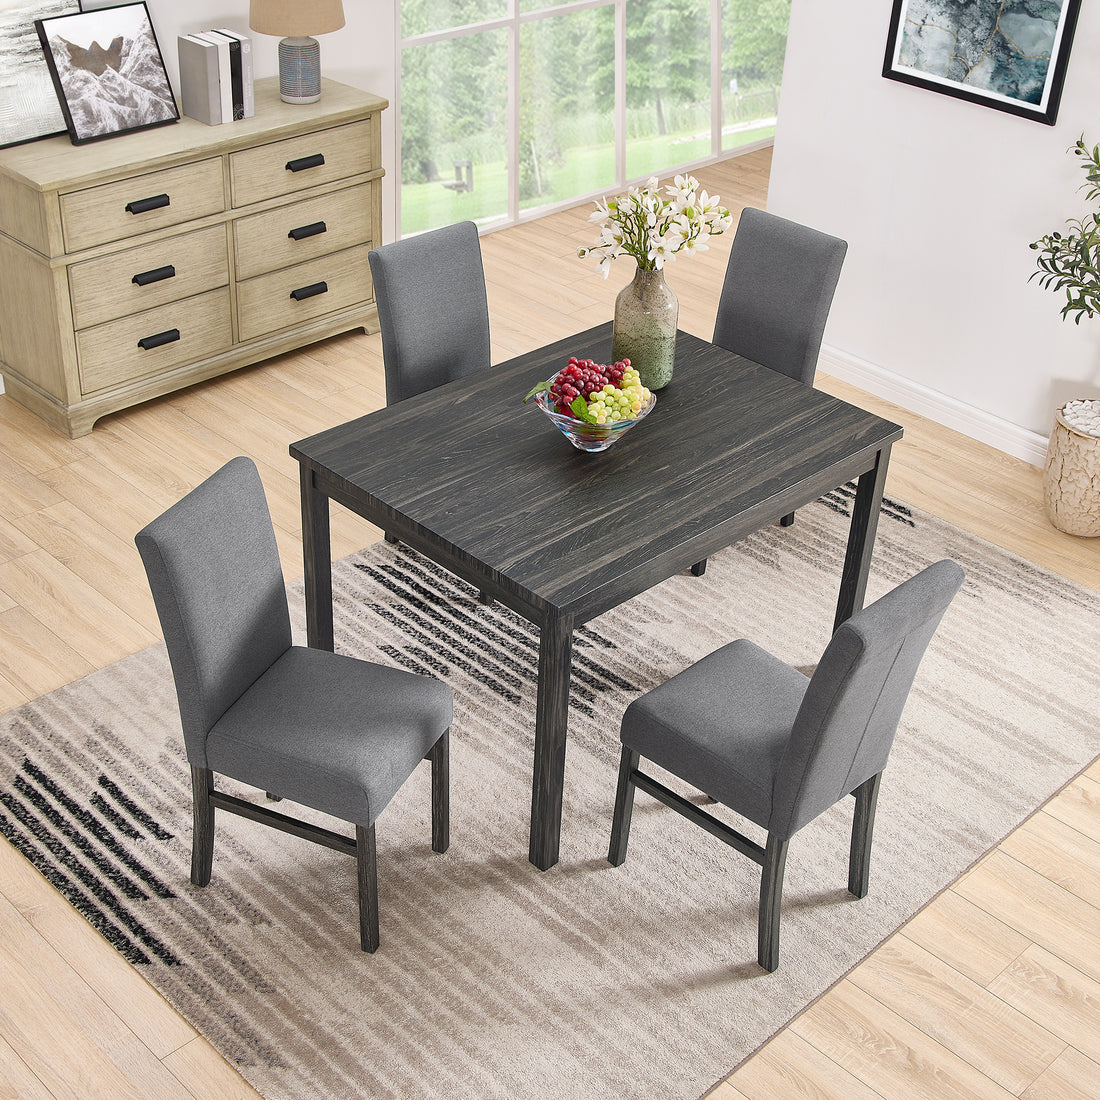 Dining table dining chairs kitchen dining table dining black+ gray-solid wood+mdf